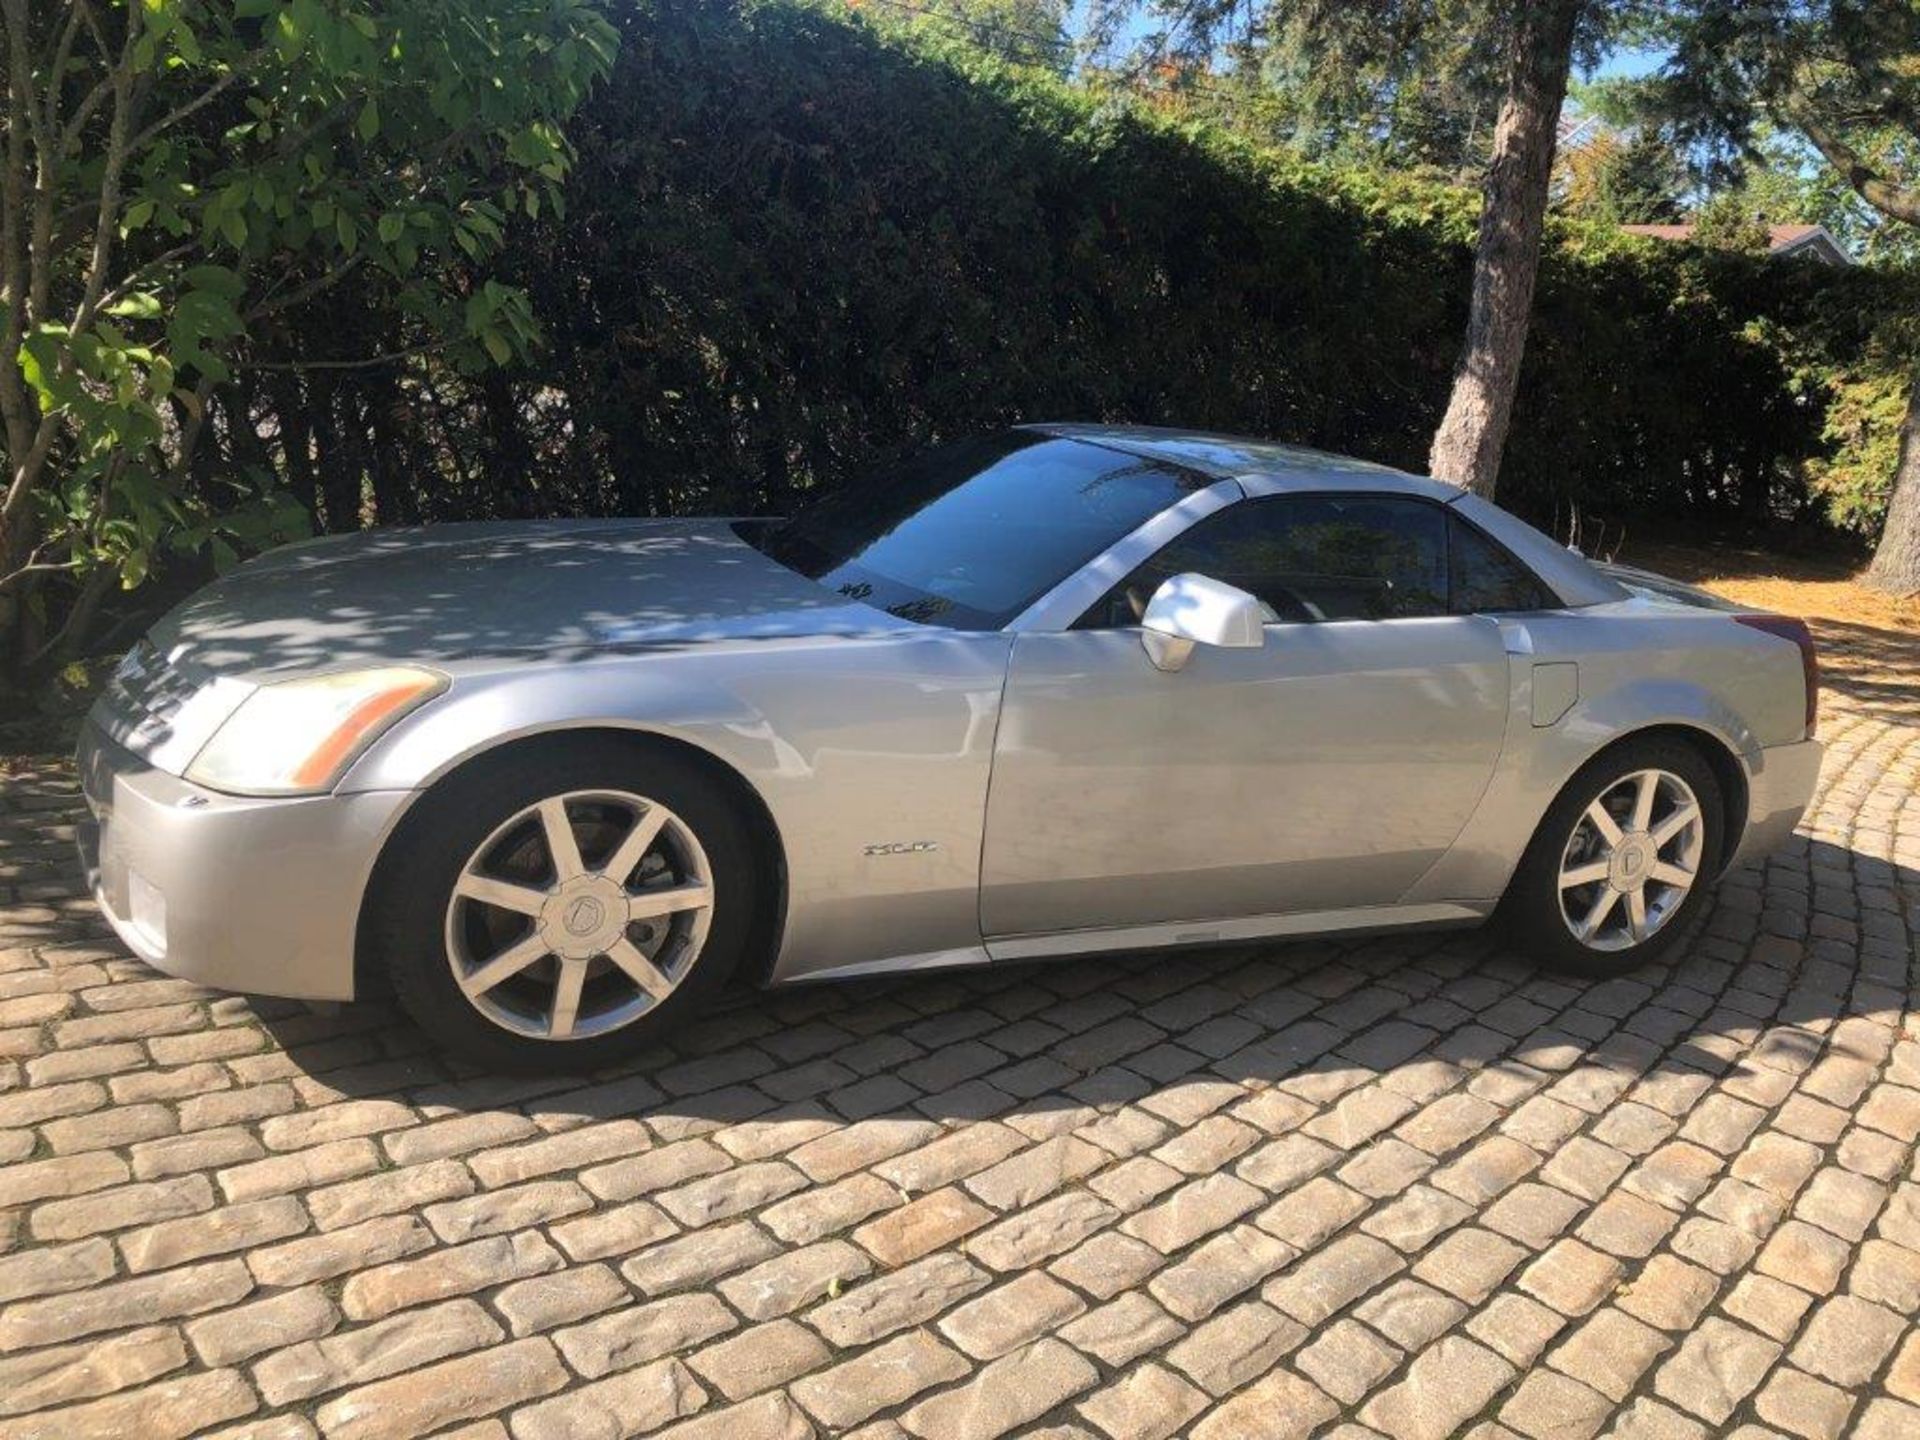 (2005) Cadillac XLR Convertible Fully Equipped.